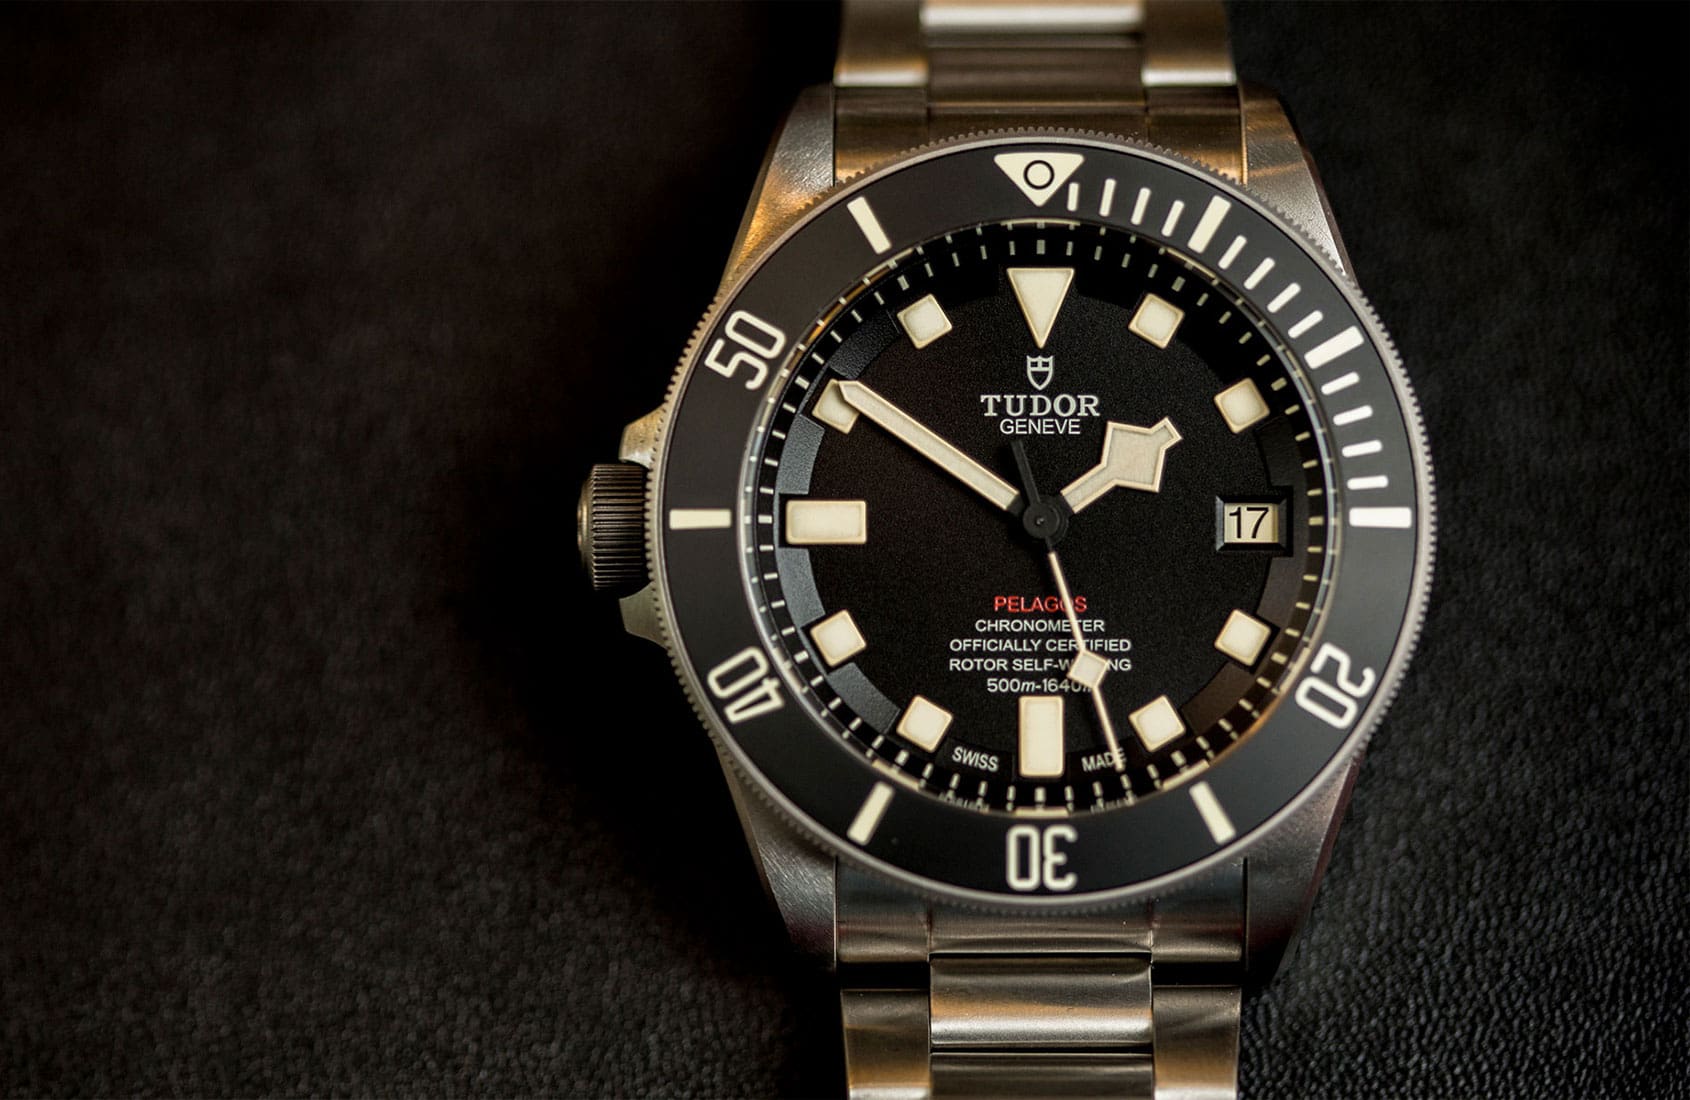 EDITOR’S PICK: 7 of the toughest watches ever made